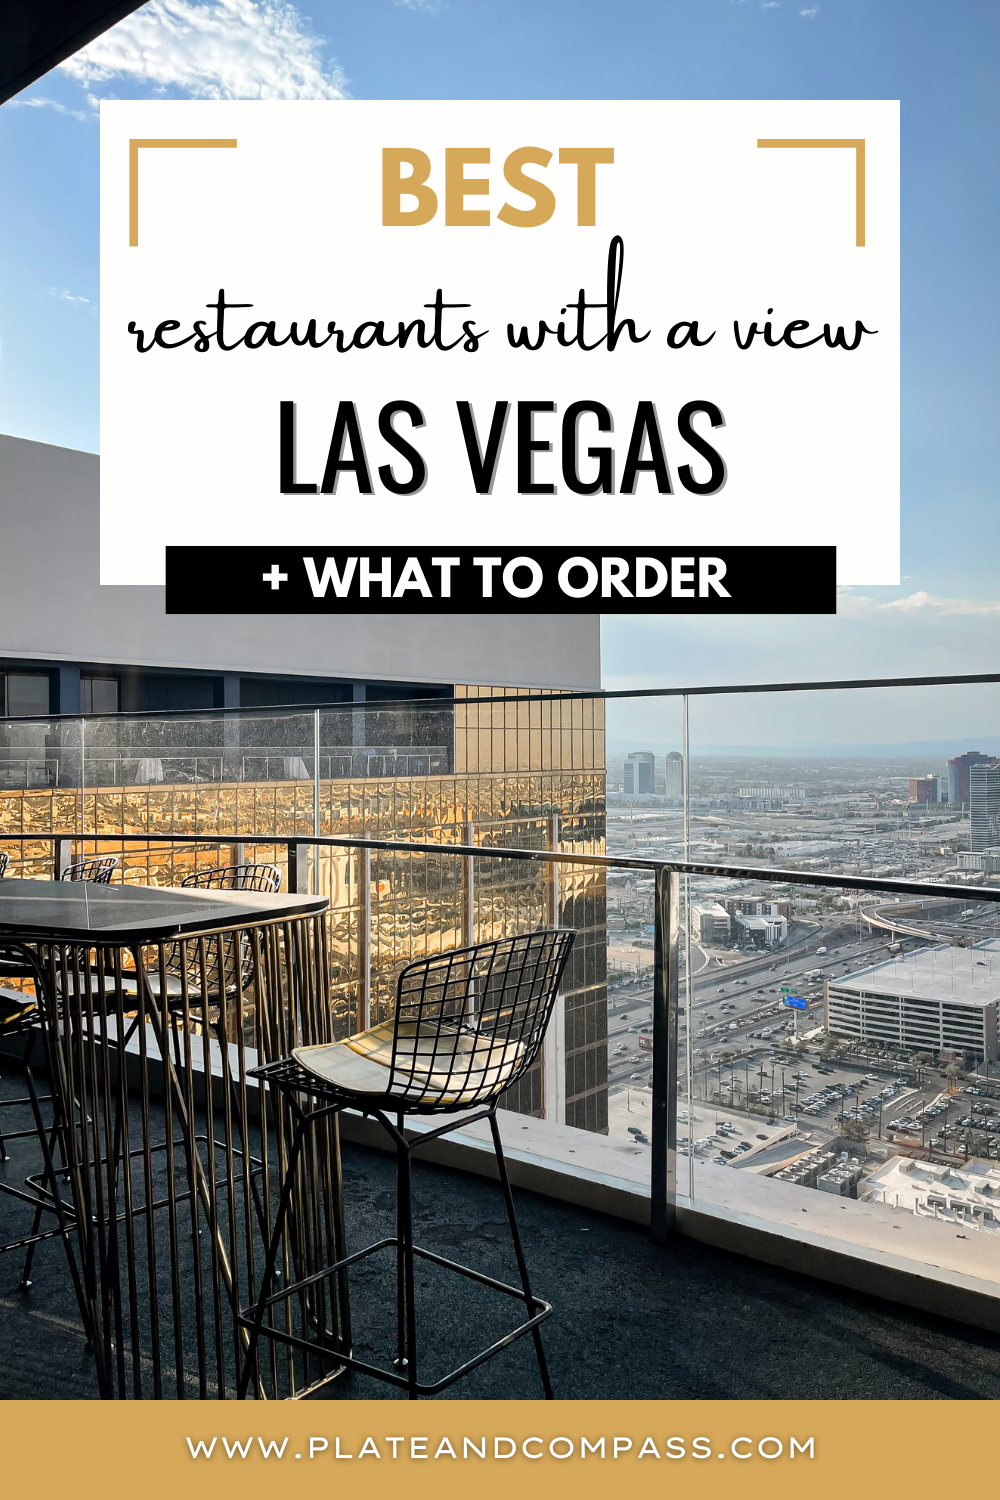 Best Restaurants with a View Las Vegas and What to Order